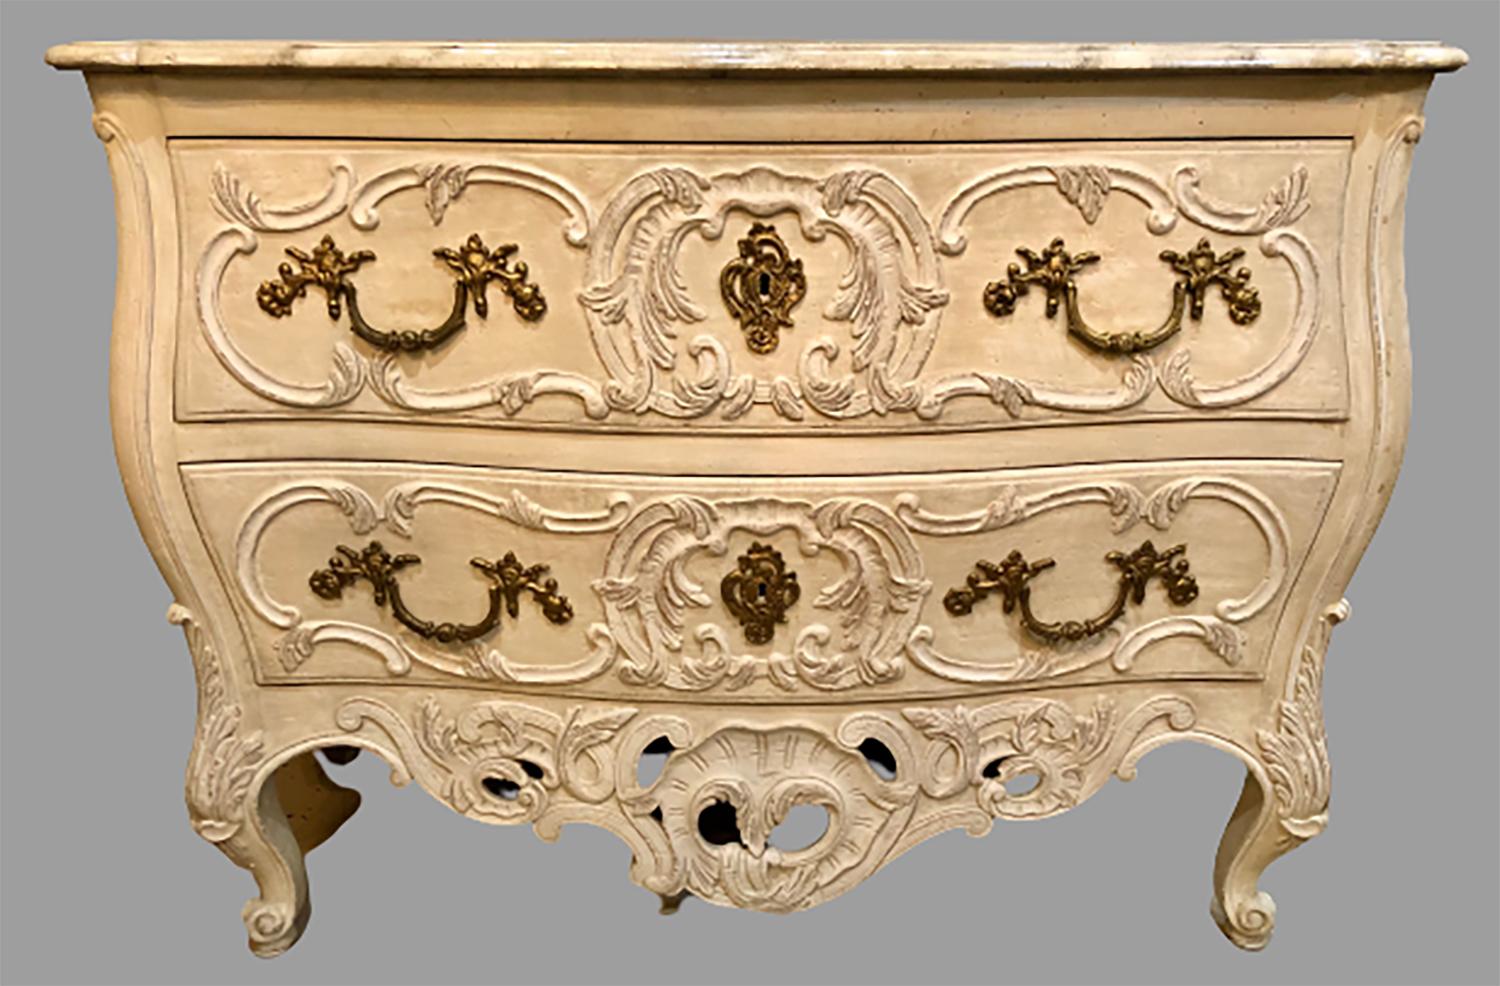 Rococo French Regency Style Commode / Dresser / Chest Faux Marble Top by Maison Jansen